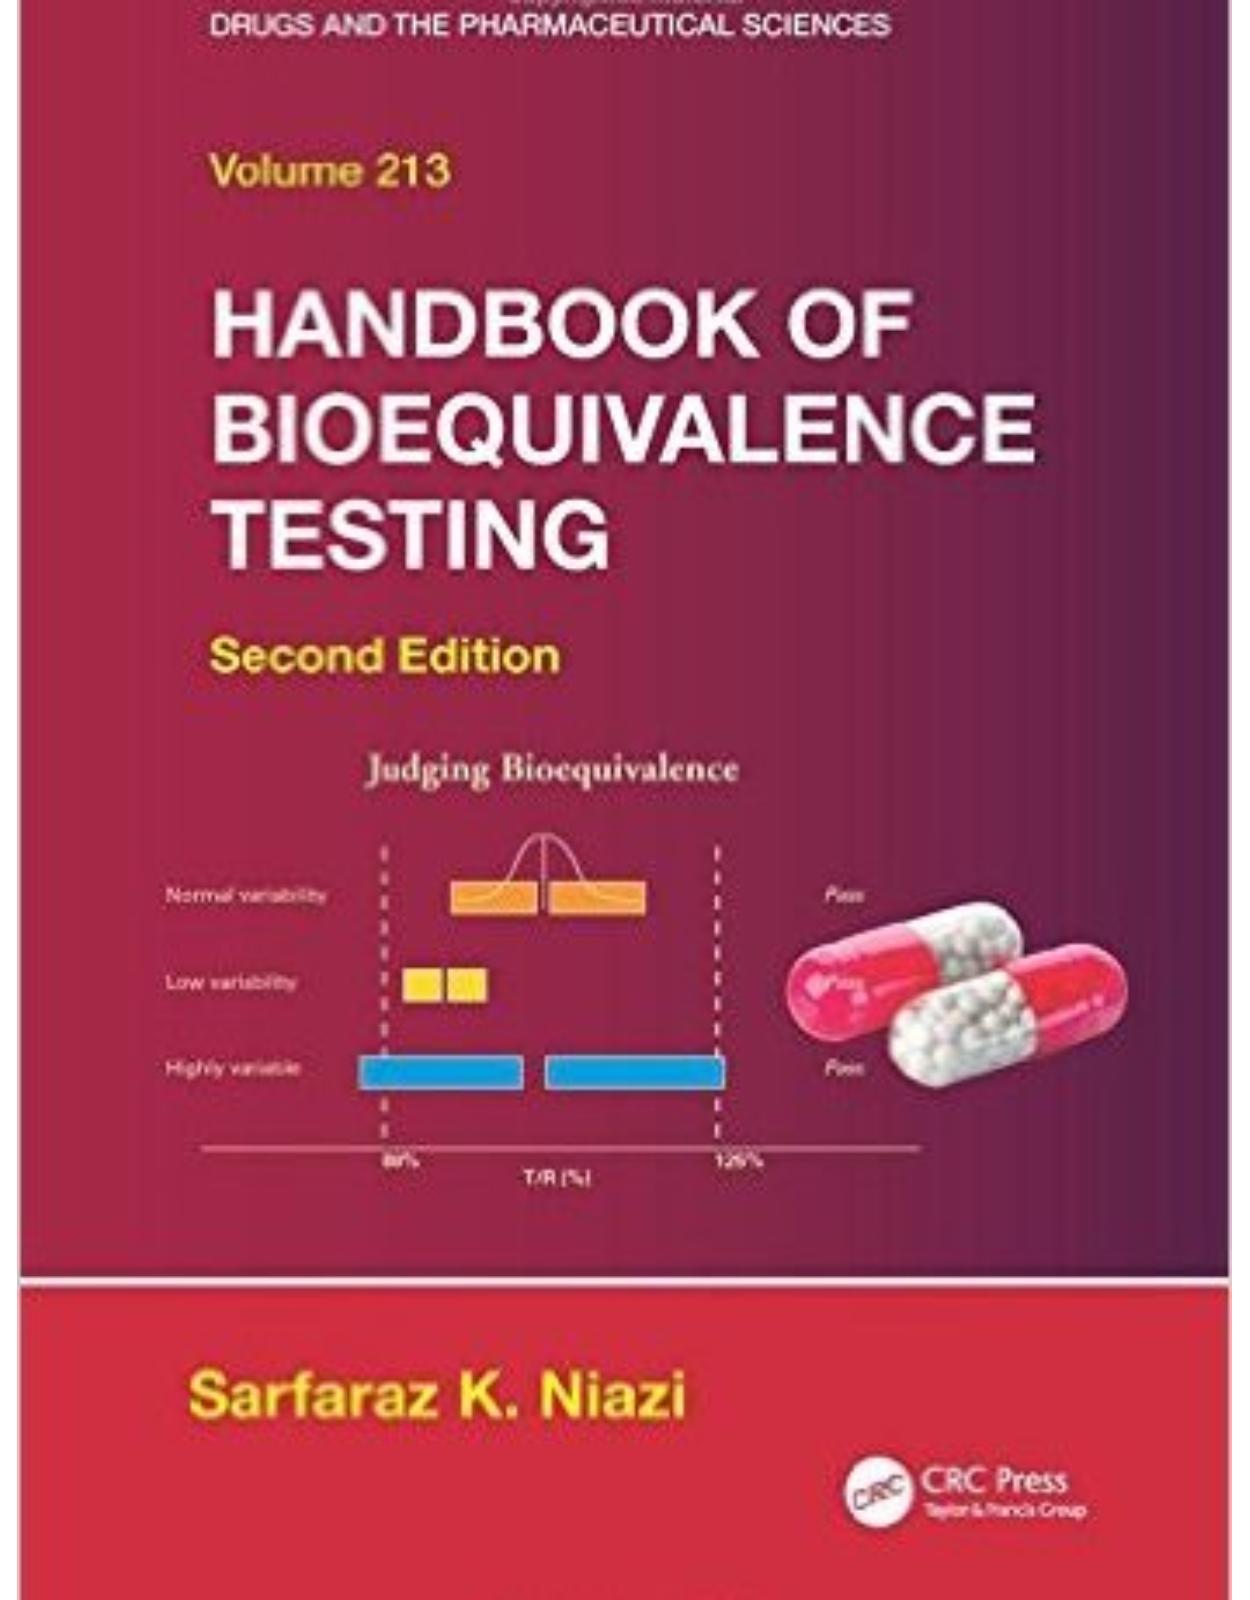 Handbook of Bioequivalence Testing, Second Edition (Drugs and the Pharmaceutical Sciences) 